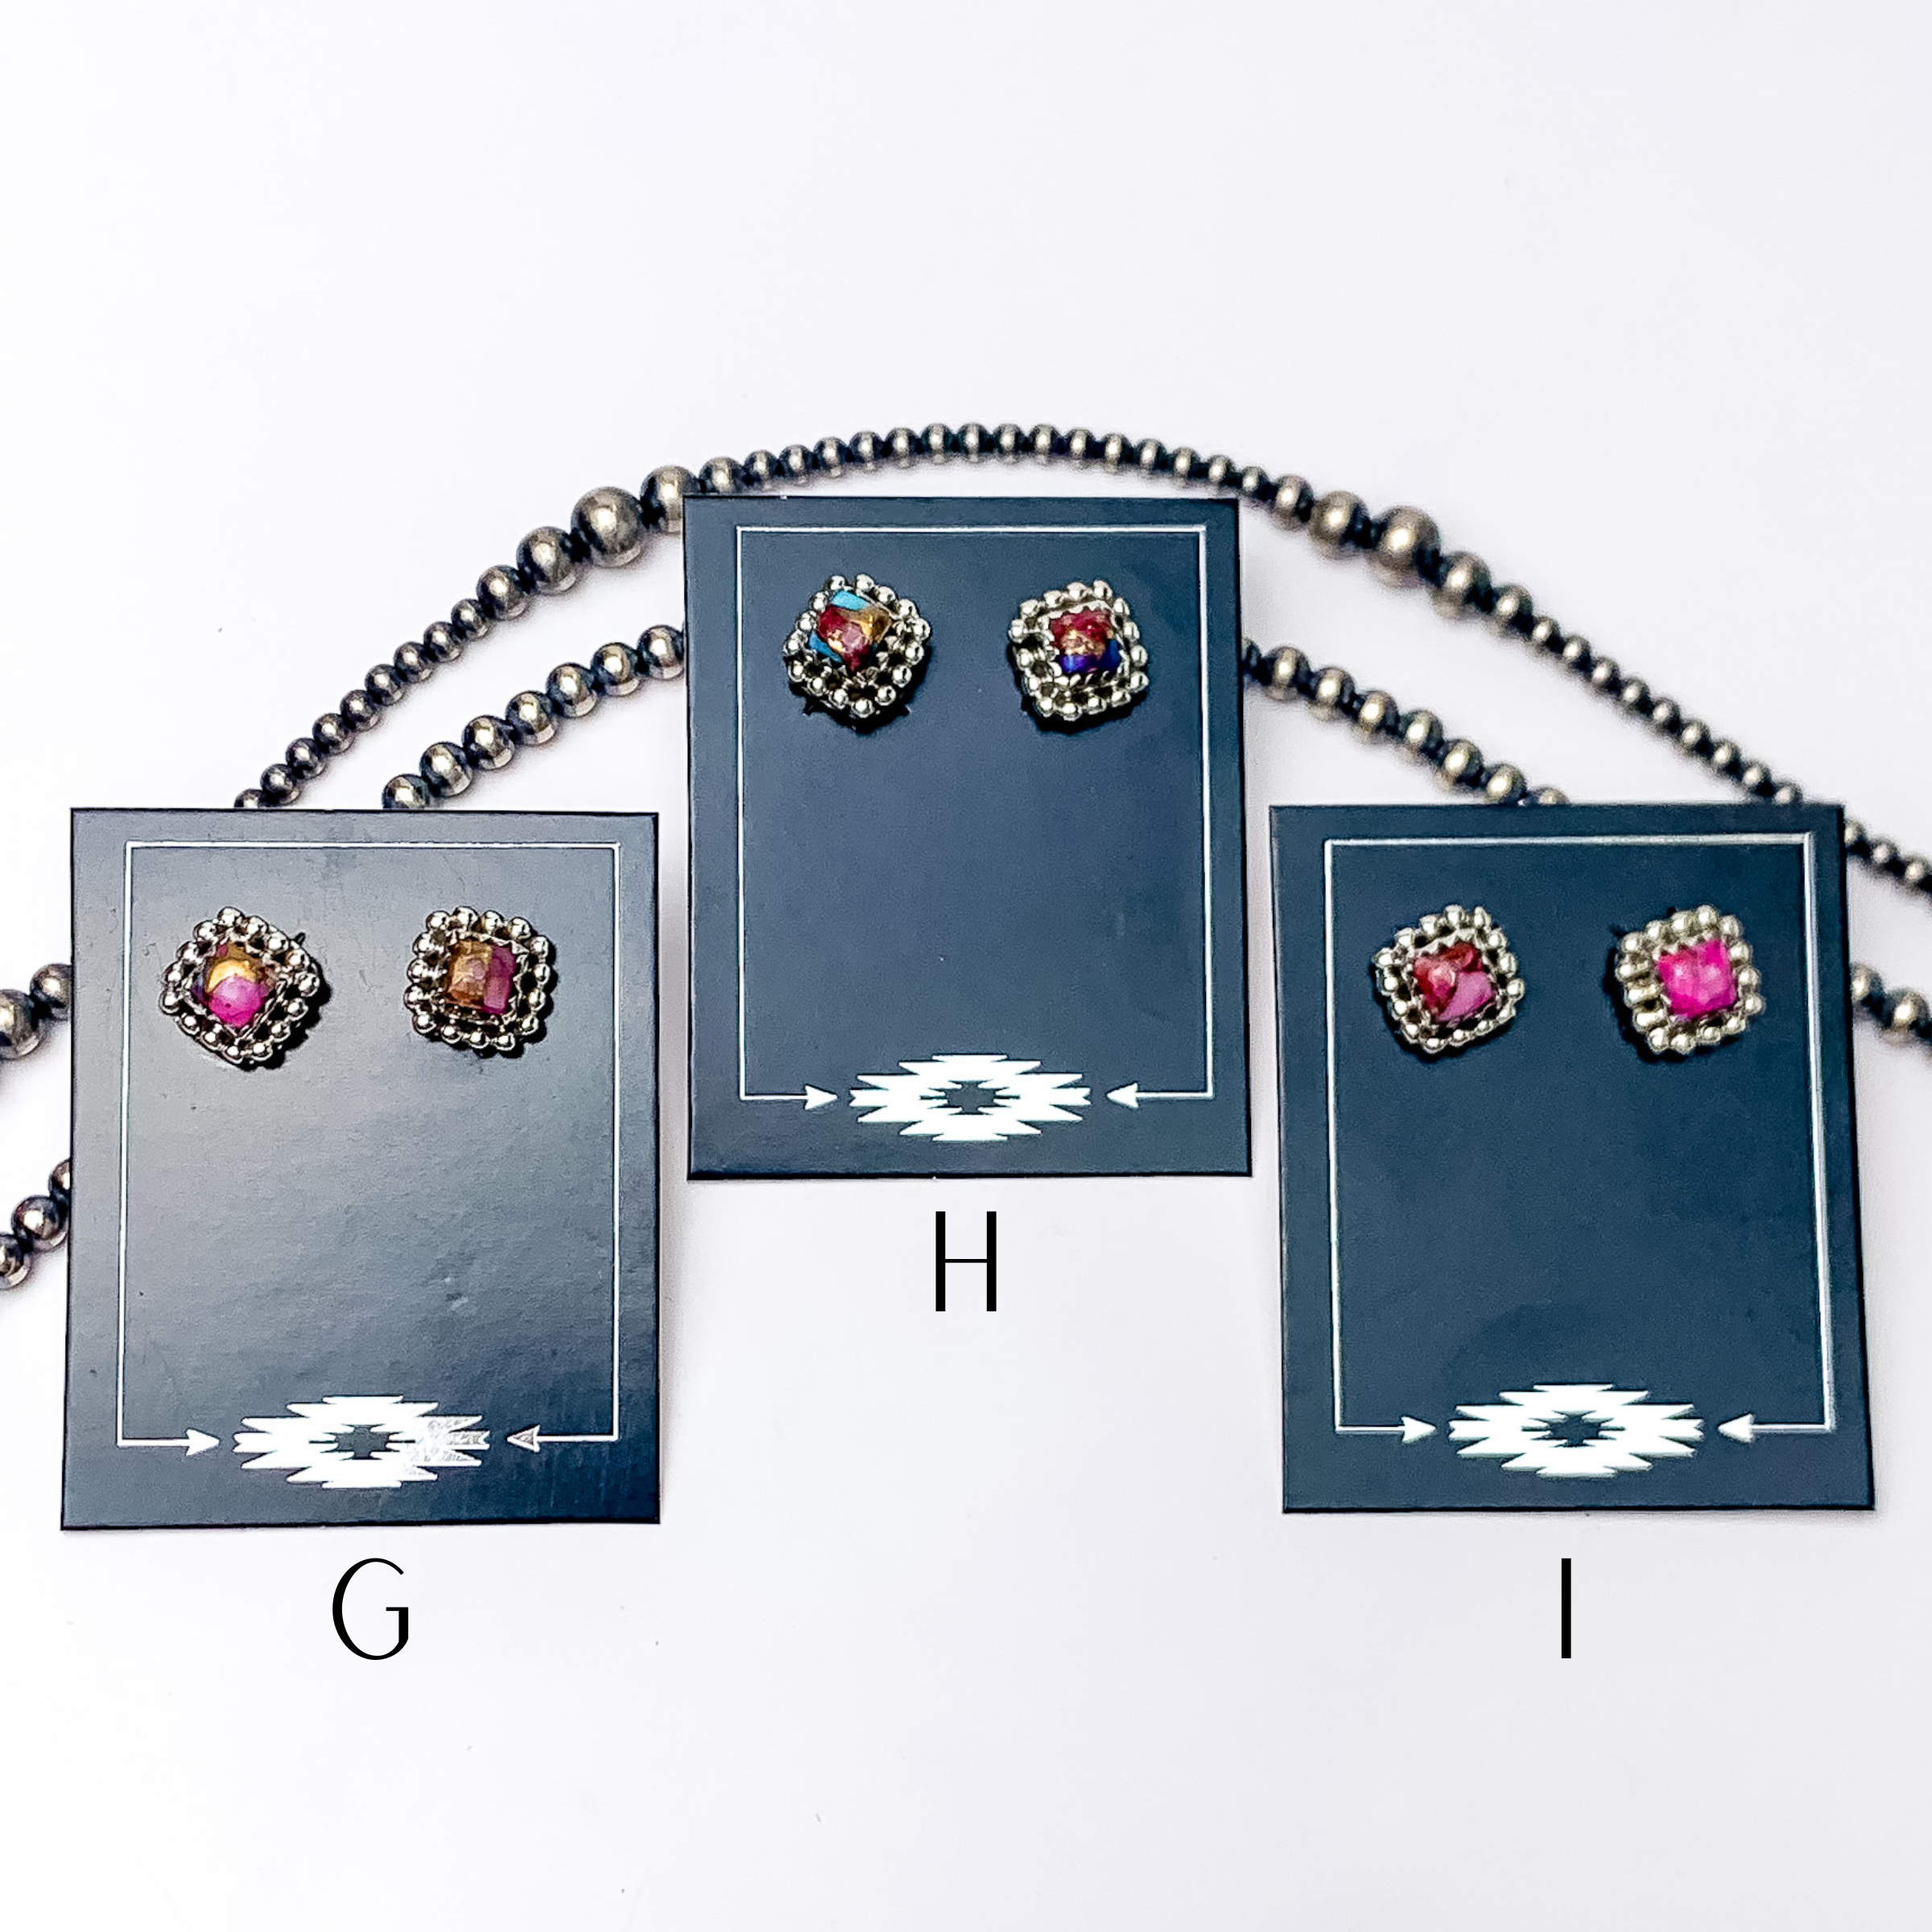 Hada Collection | Handmade Sterling Silver Square Shaped Stud Earrings with Pink Dahlia Stones - Giddy Up Glamour Boutique